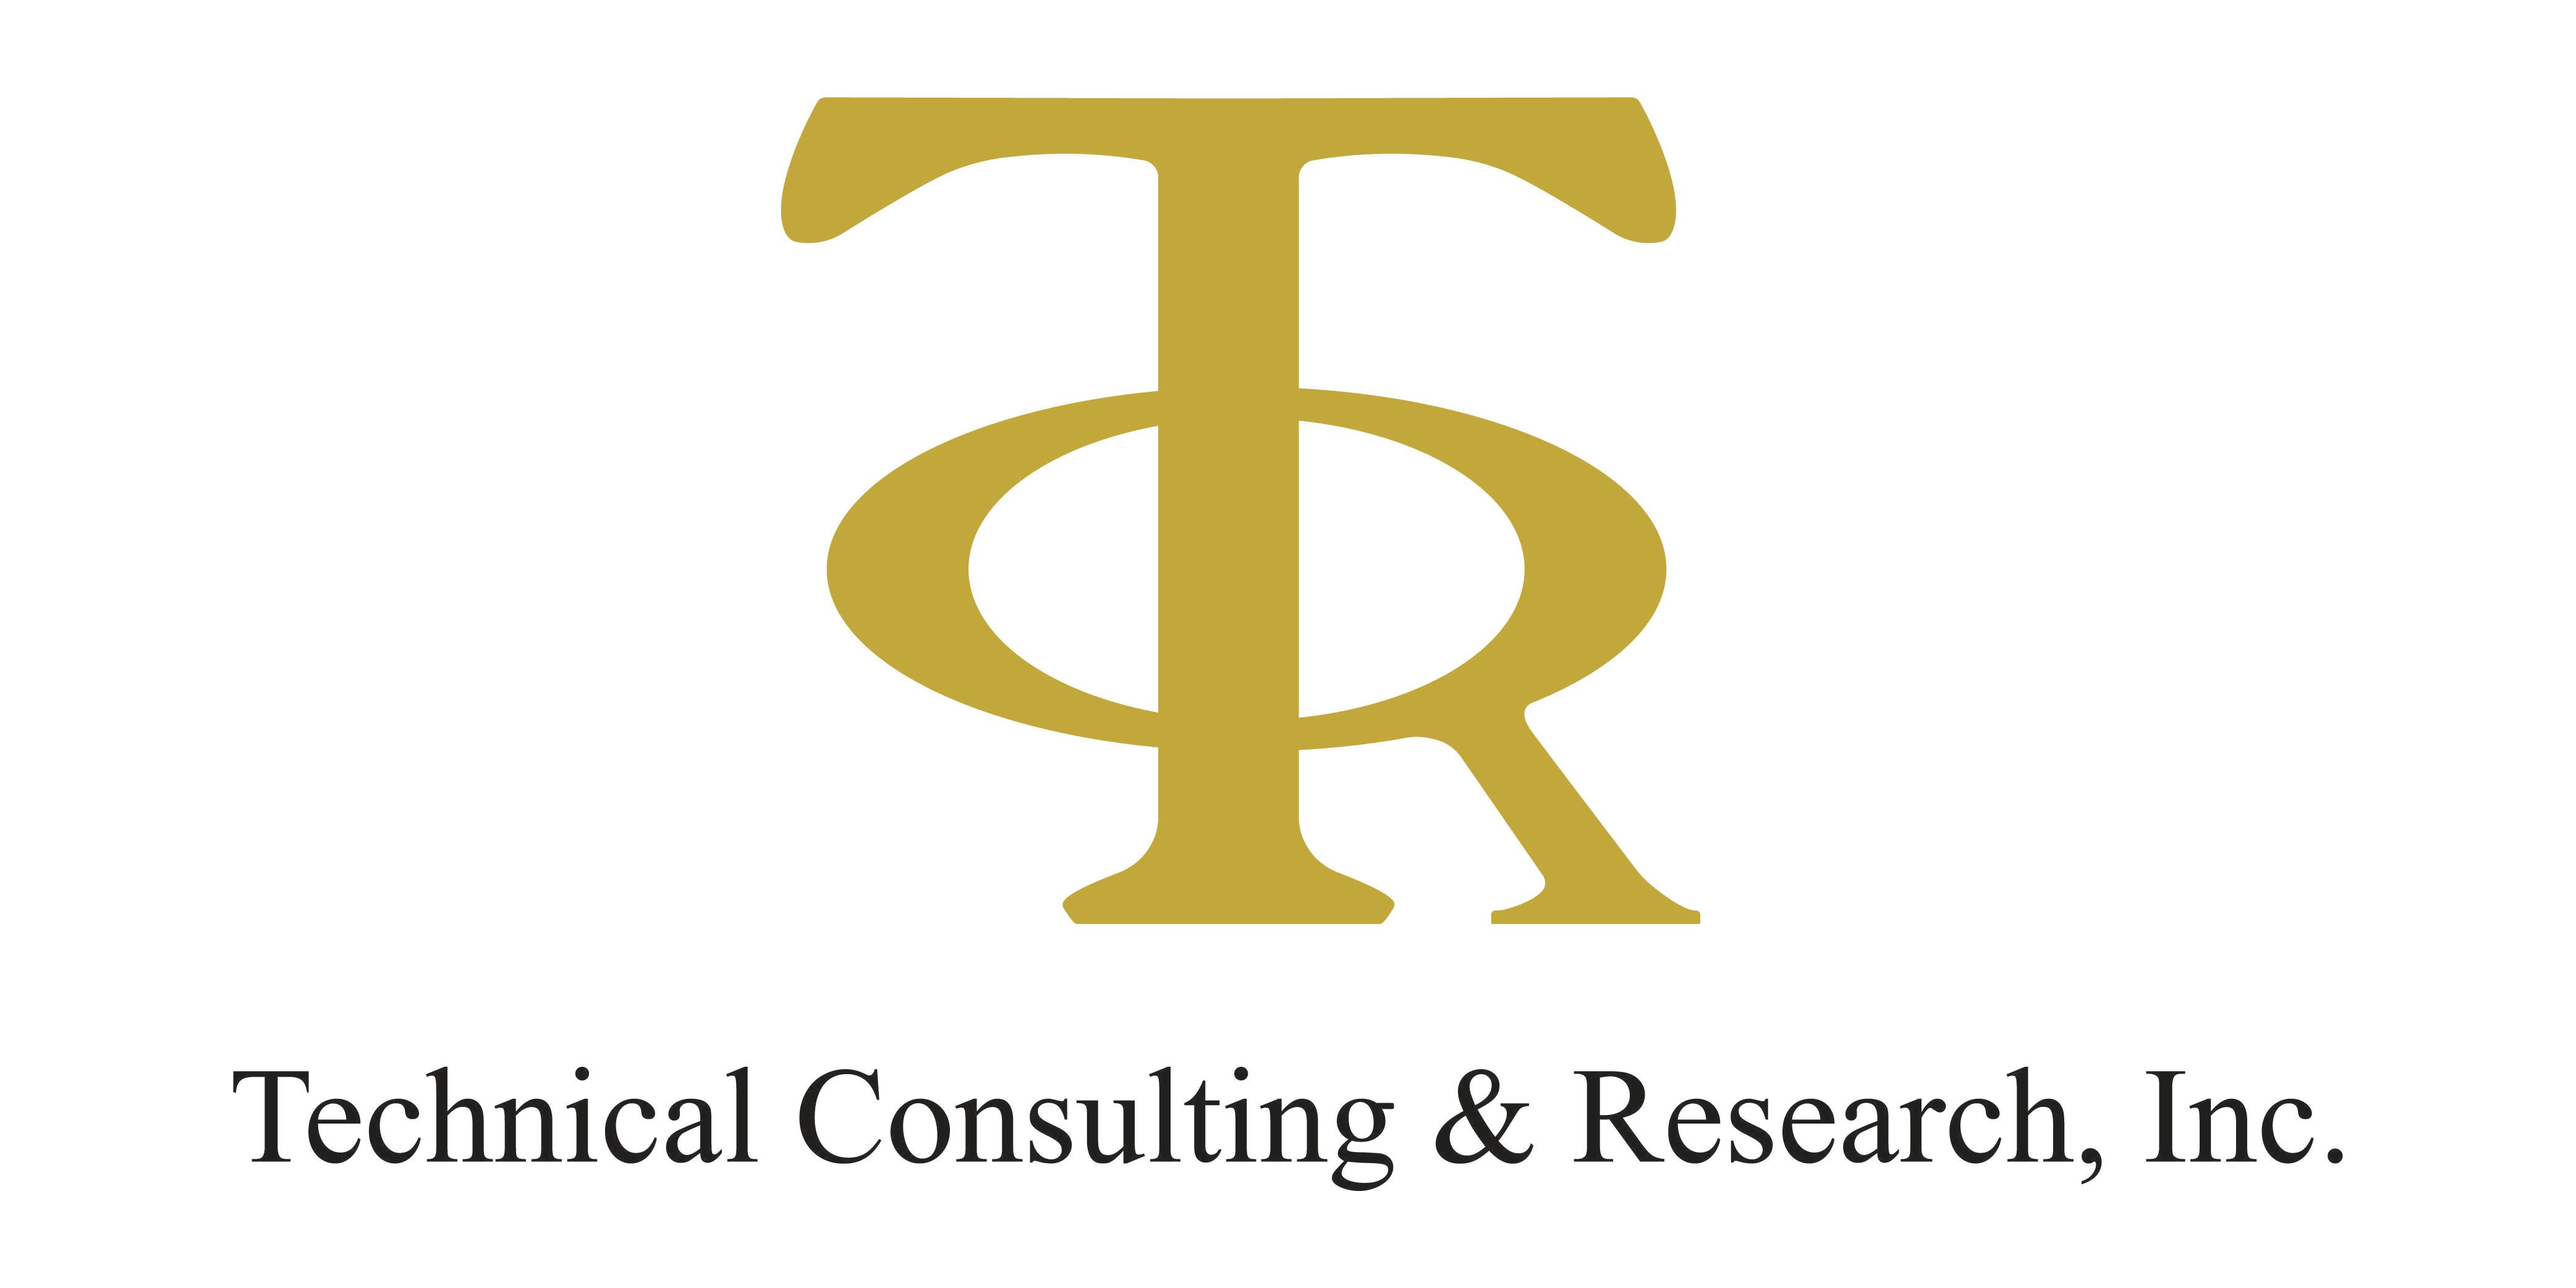 TCR Logo - Technical Consulting and Research, Inc.